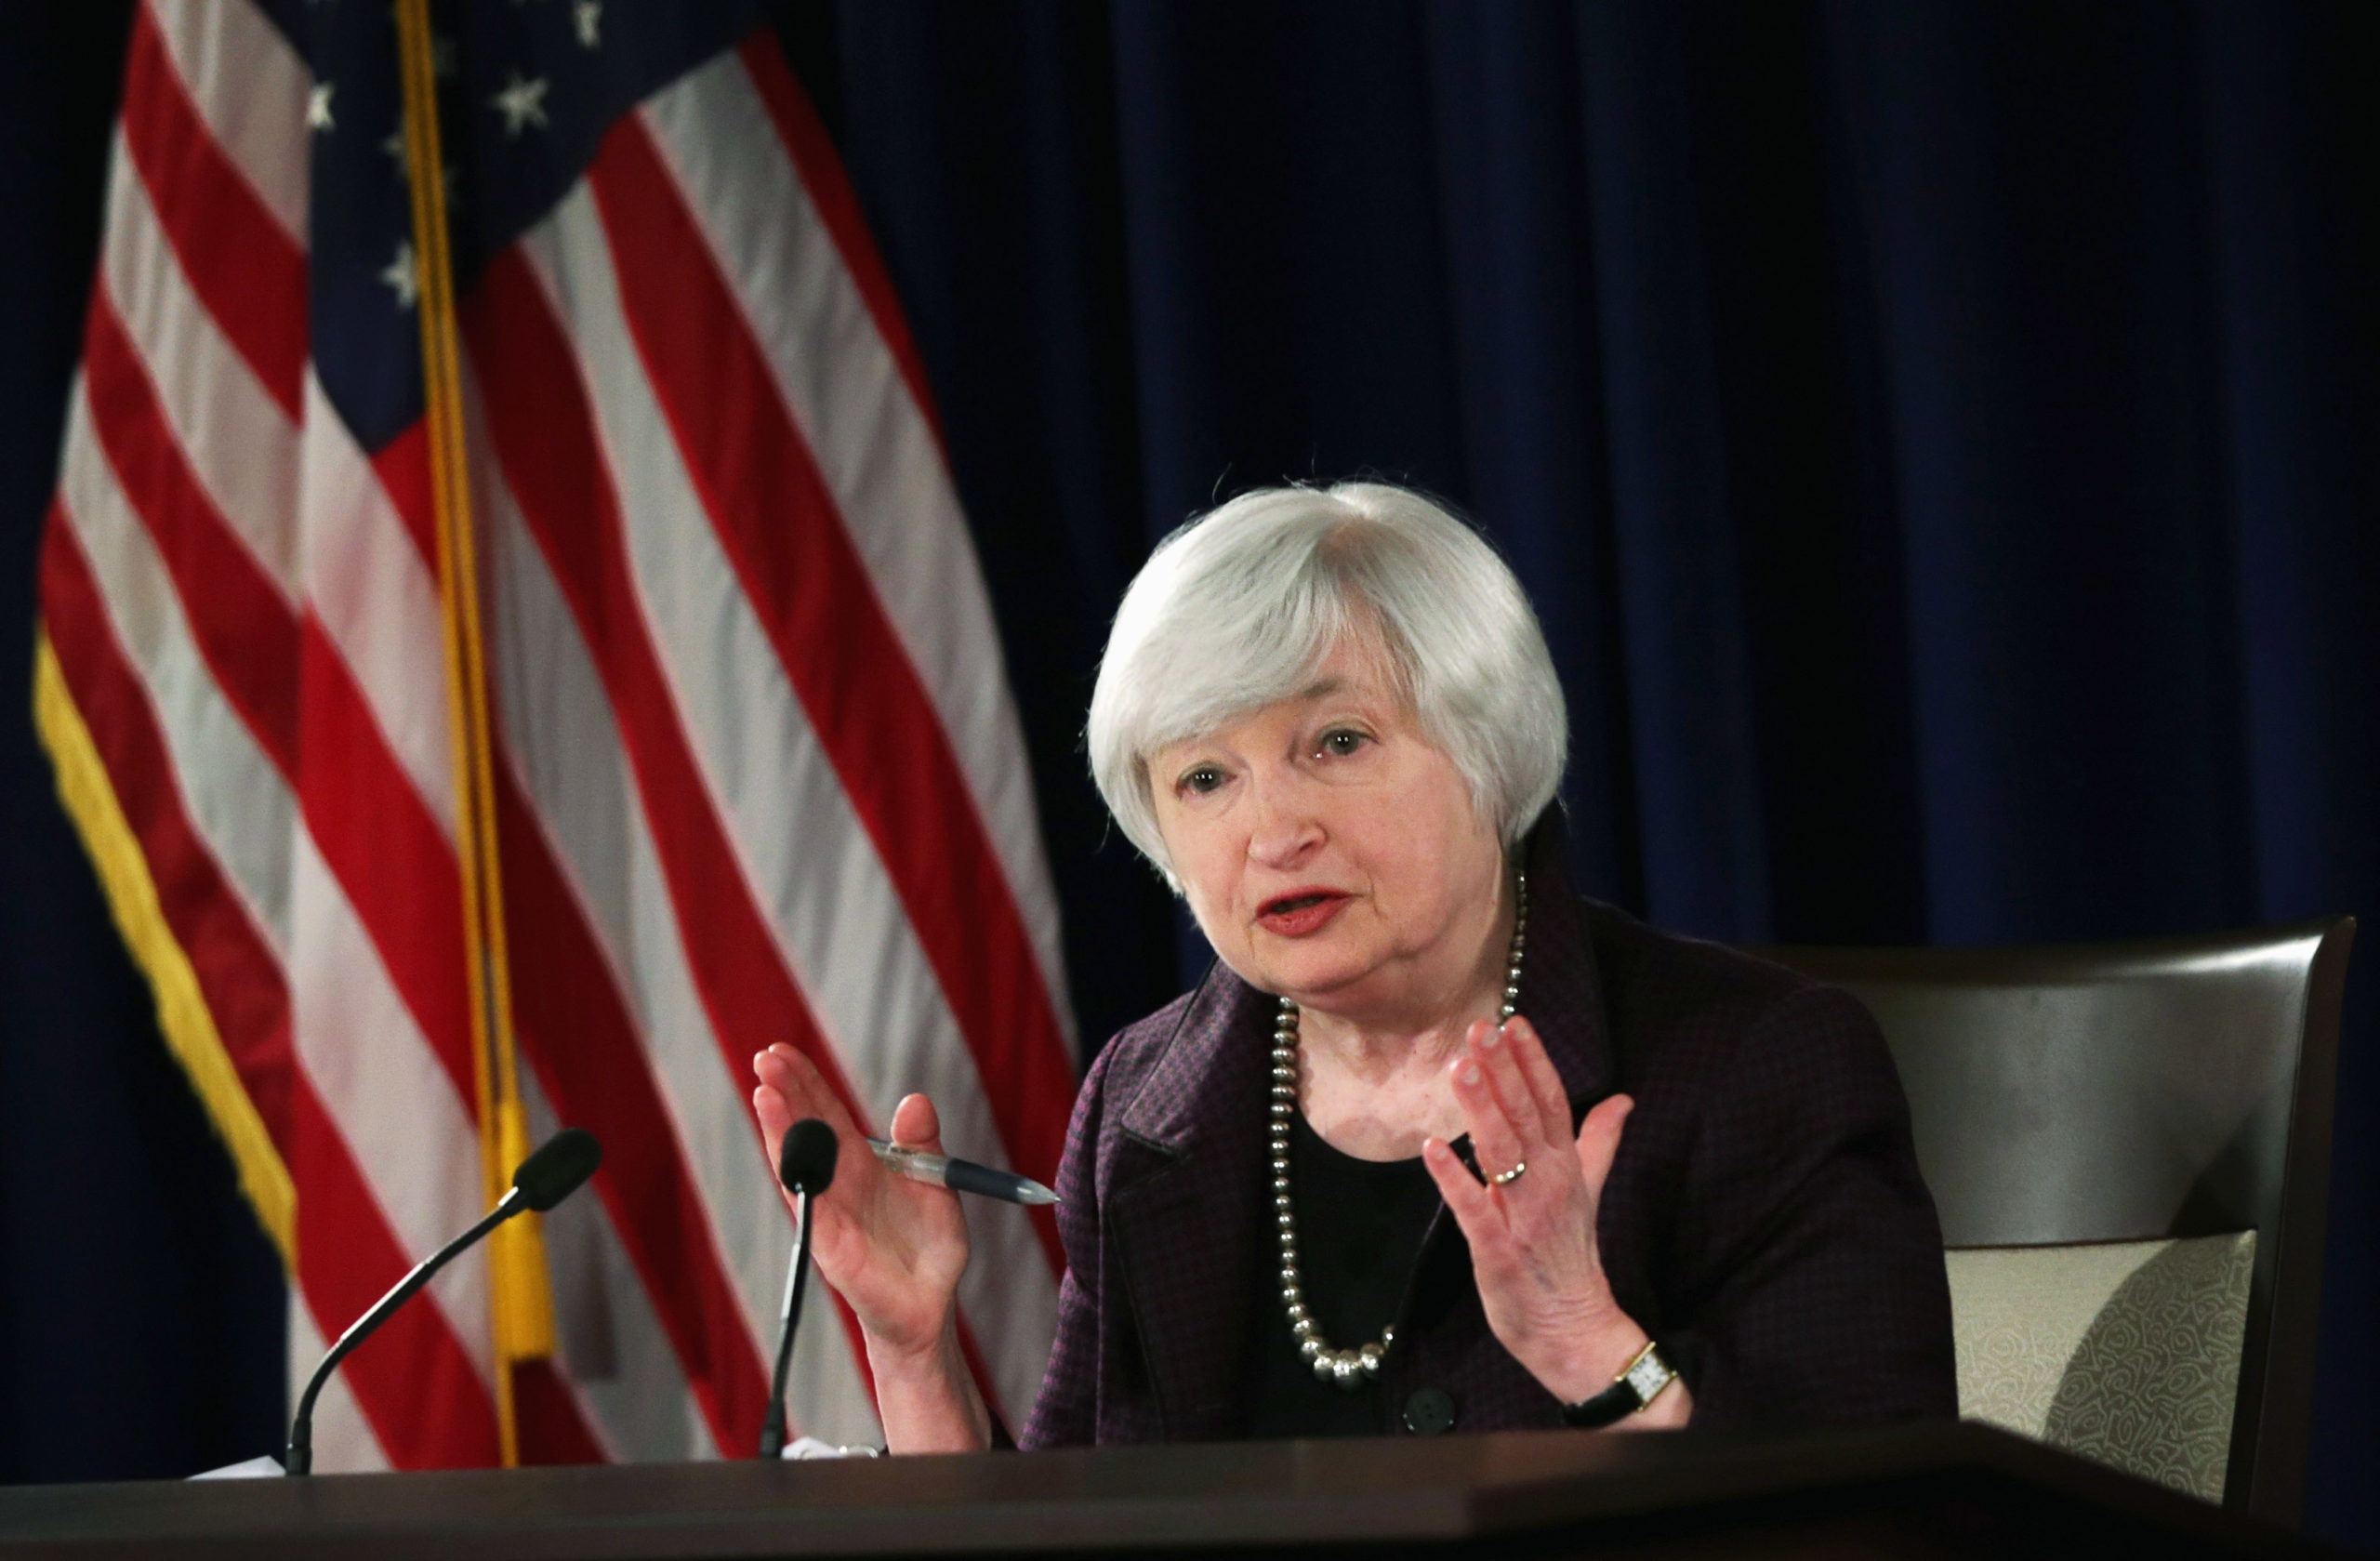 WASHINGTON, DC - DECEMBER 17: Federal Reserve Board Chairwoman Janet Yellen speaks during a news conference December 17, 2014 at the headquarters of Federal Reserve Board of Governors in Washington, DC. The Federal Reserve announced that it will not increase target funds rate for now. (Photo by Alex Wong/Getty Images)